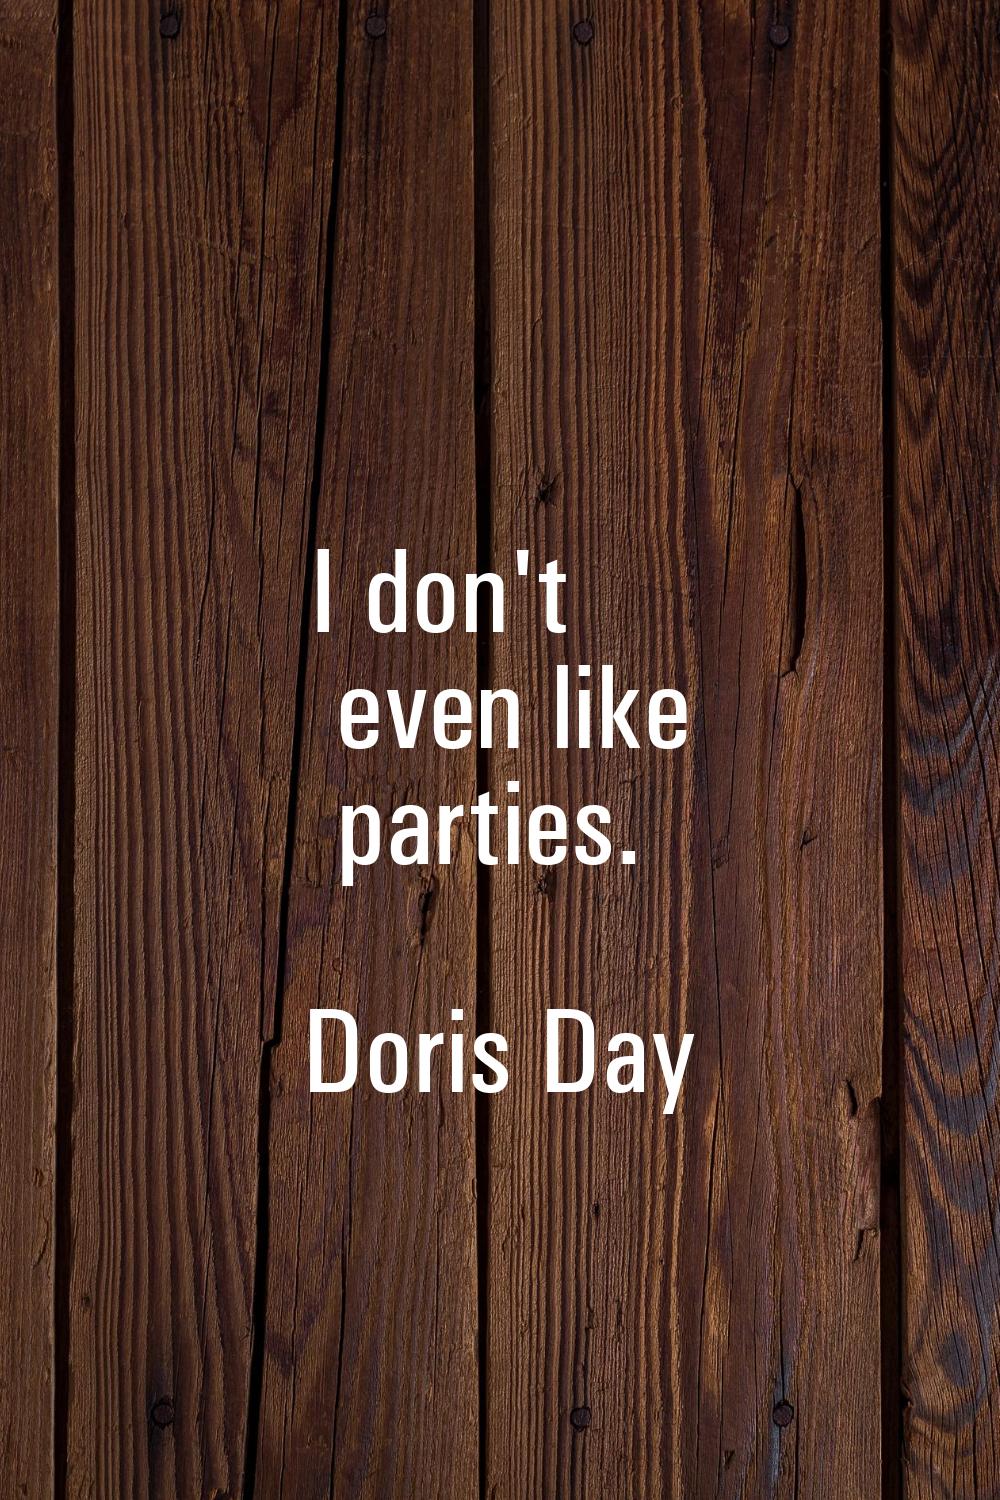 I don't even like parties.